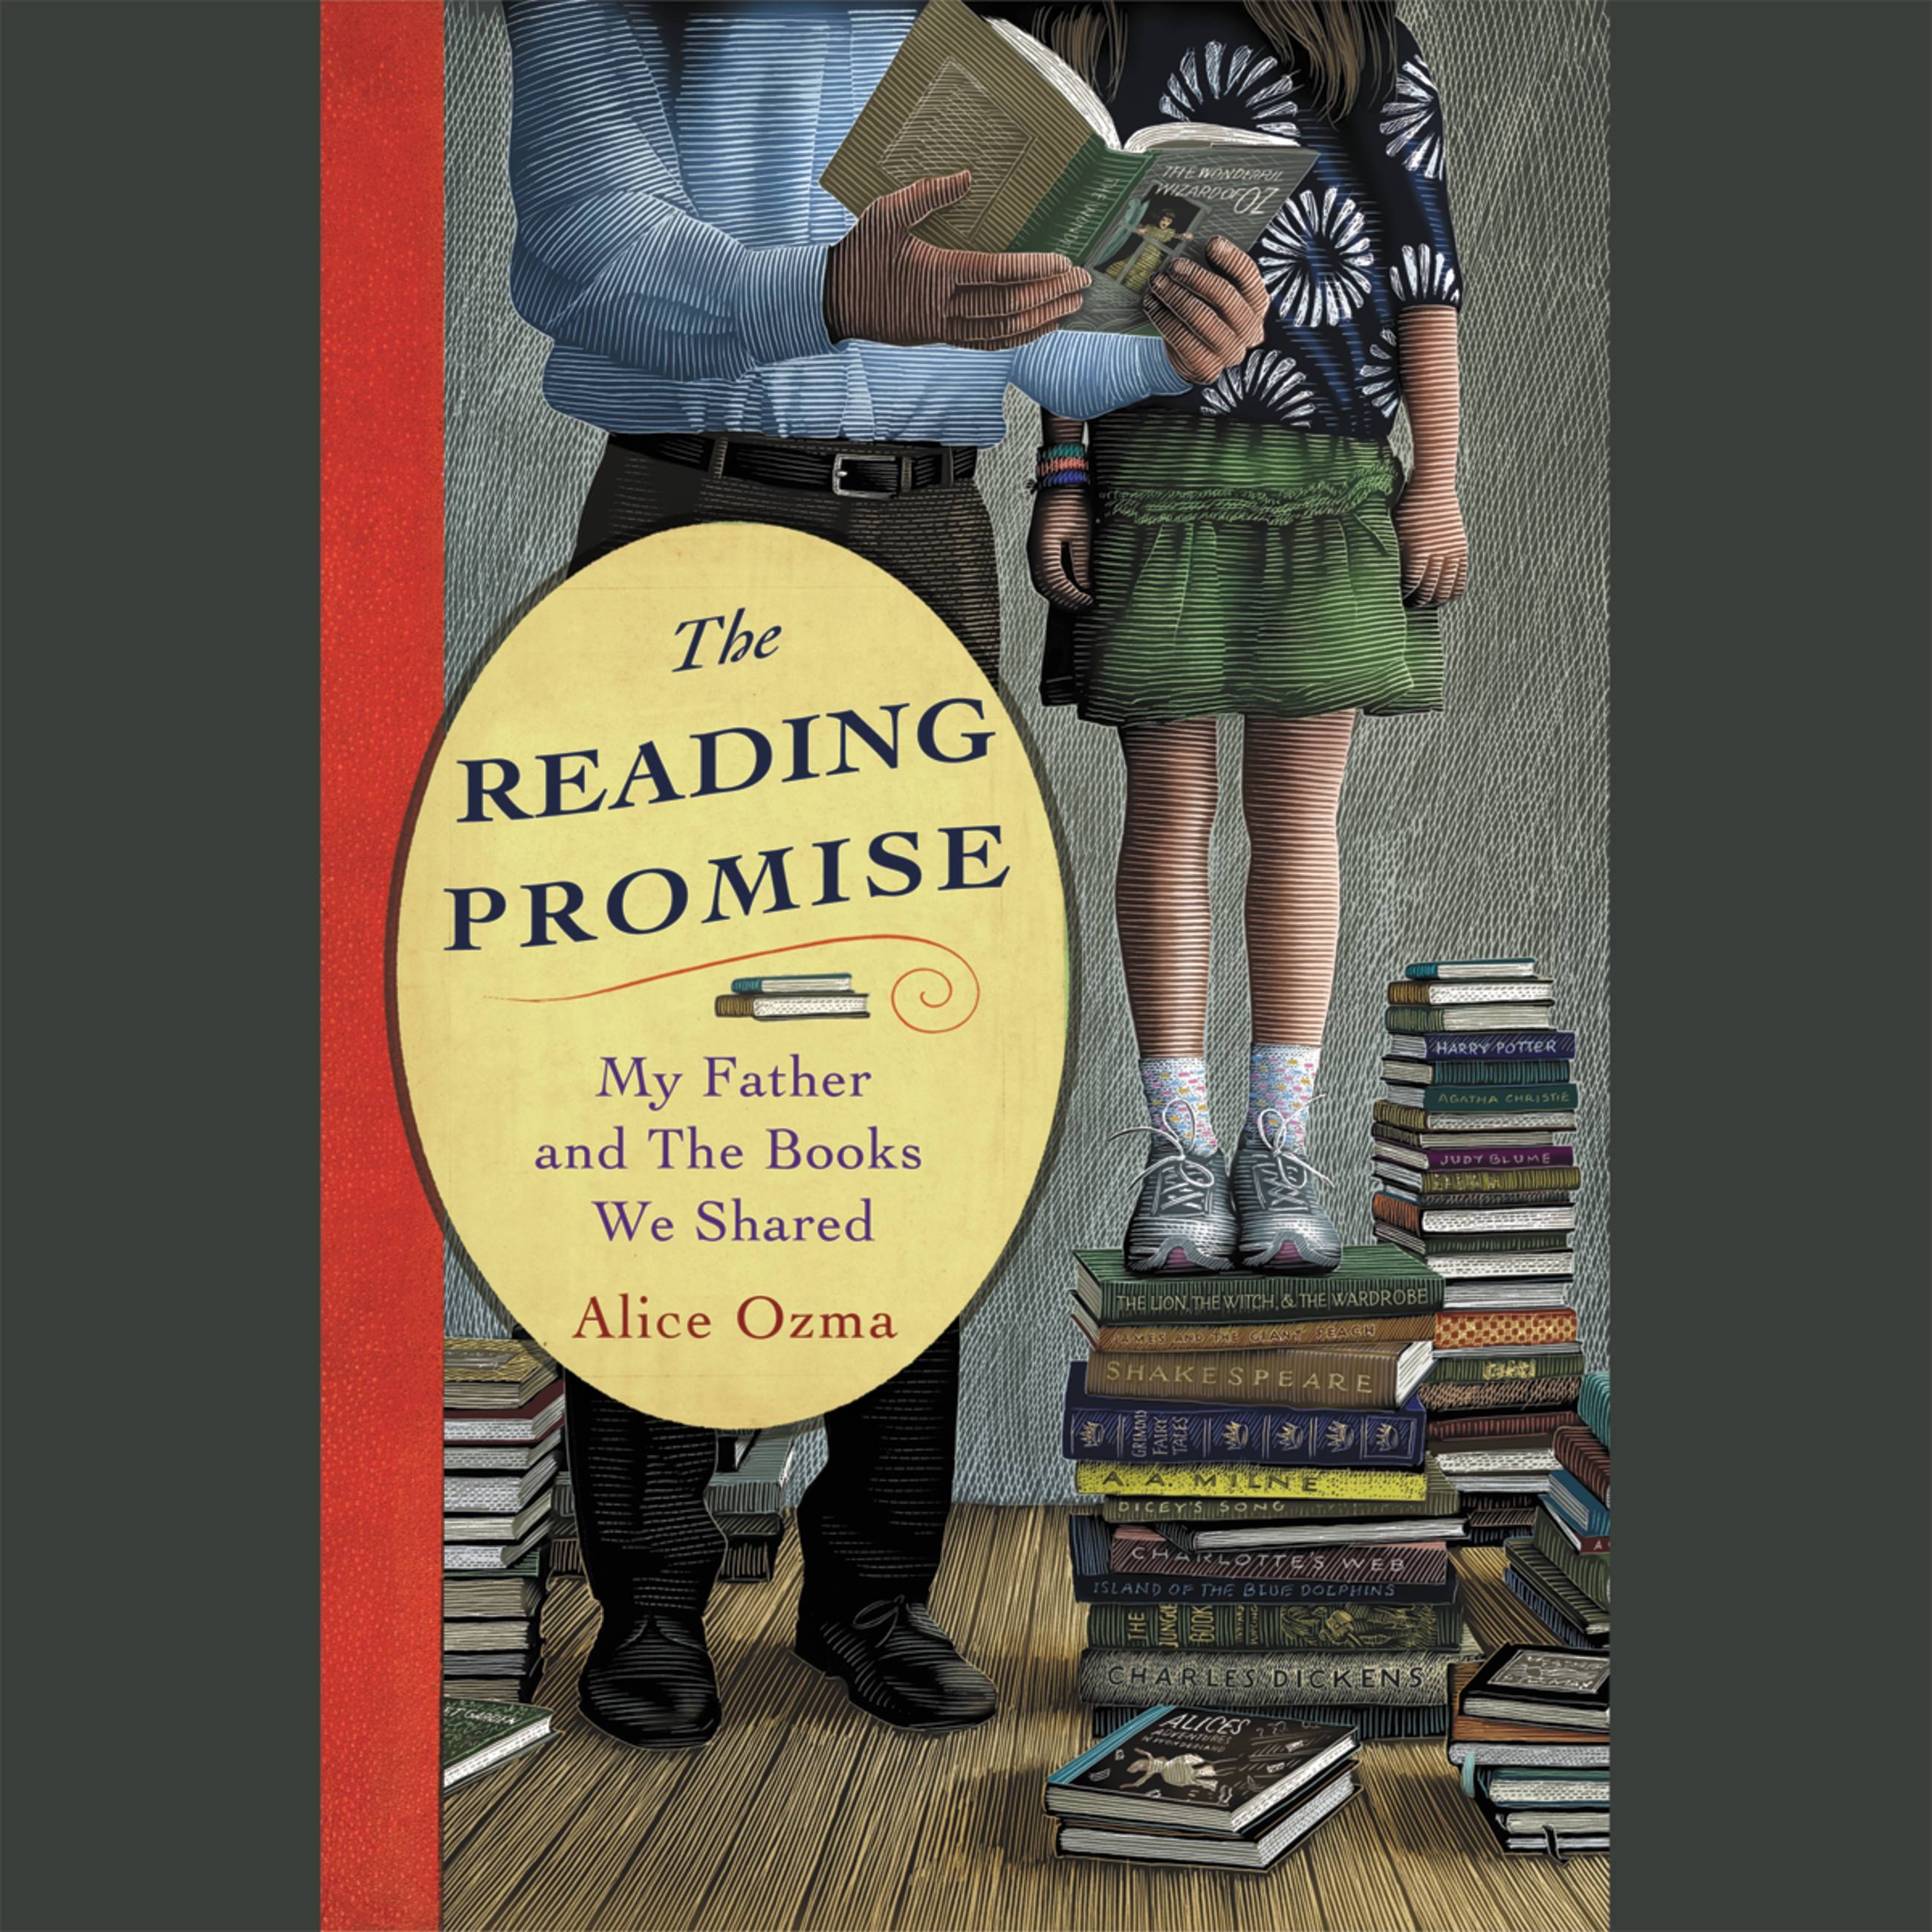 He gives books to us. My Promise. Book sharing.